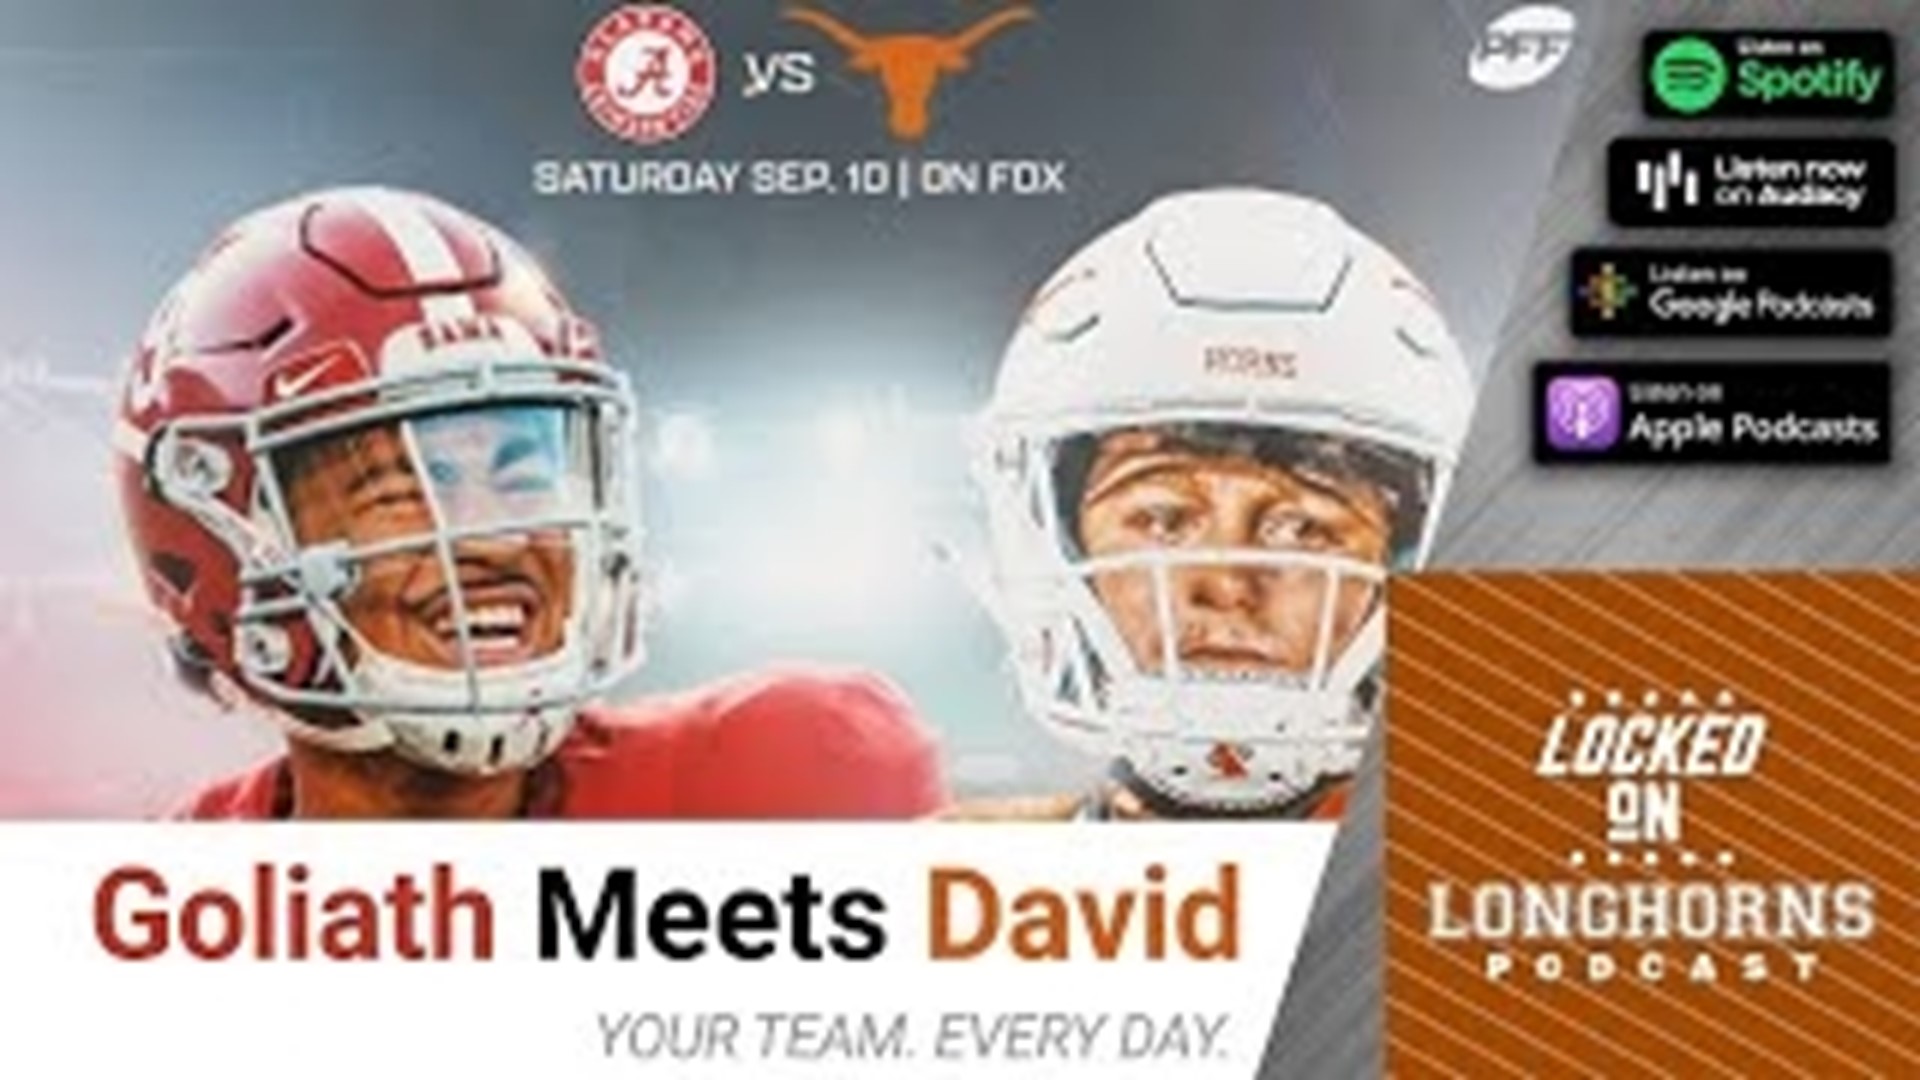 Nick Saban and the Alabama Crimson Tide face off against Steve Sarkisian and the Texas Longhorns on Saturday in DKR.